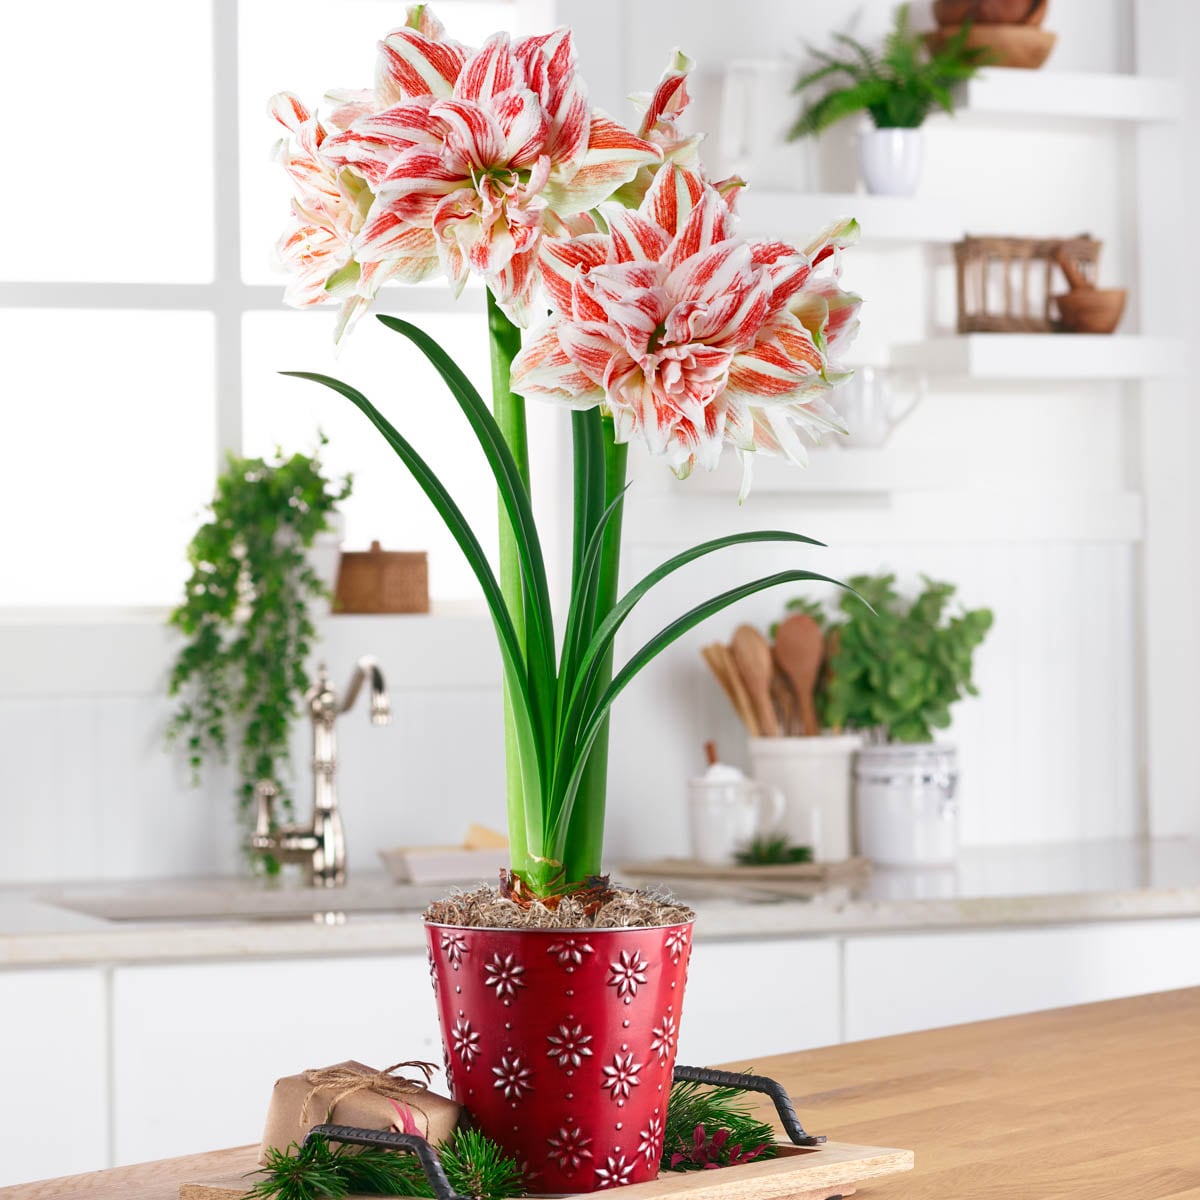 Annual Dancing Queen Pink and White Flowering Amaryllis Bulb Gift Kit ...